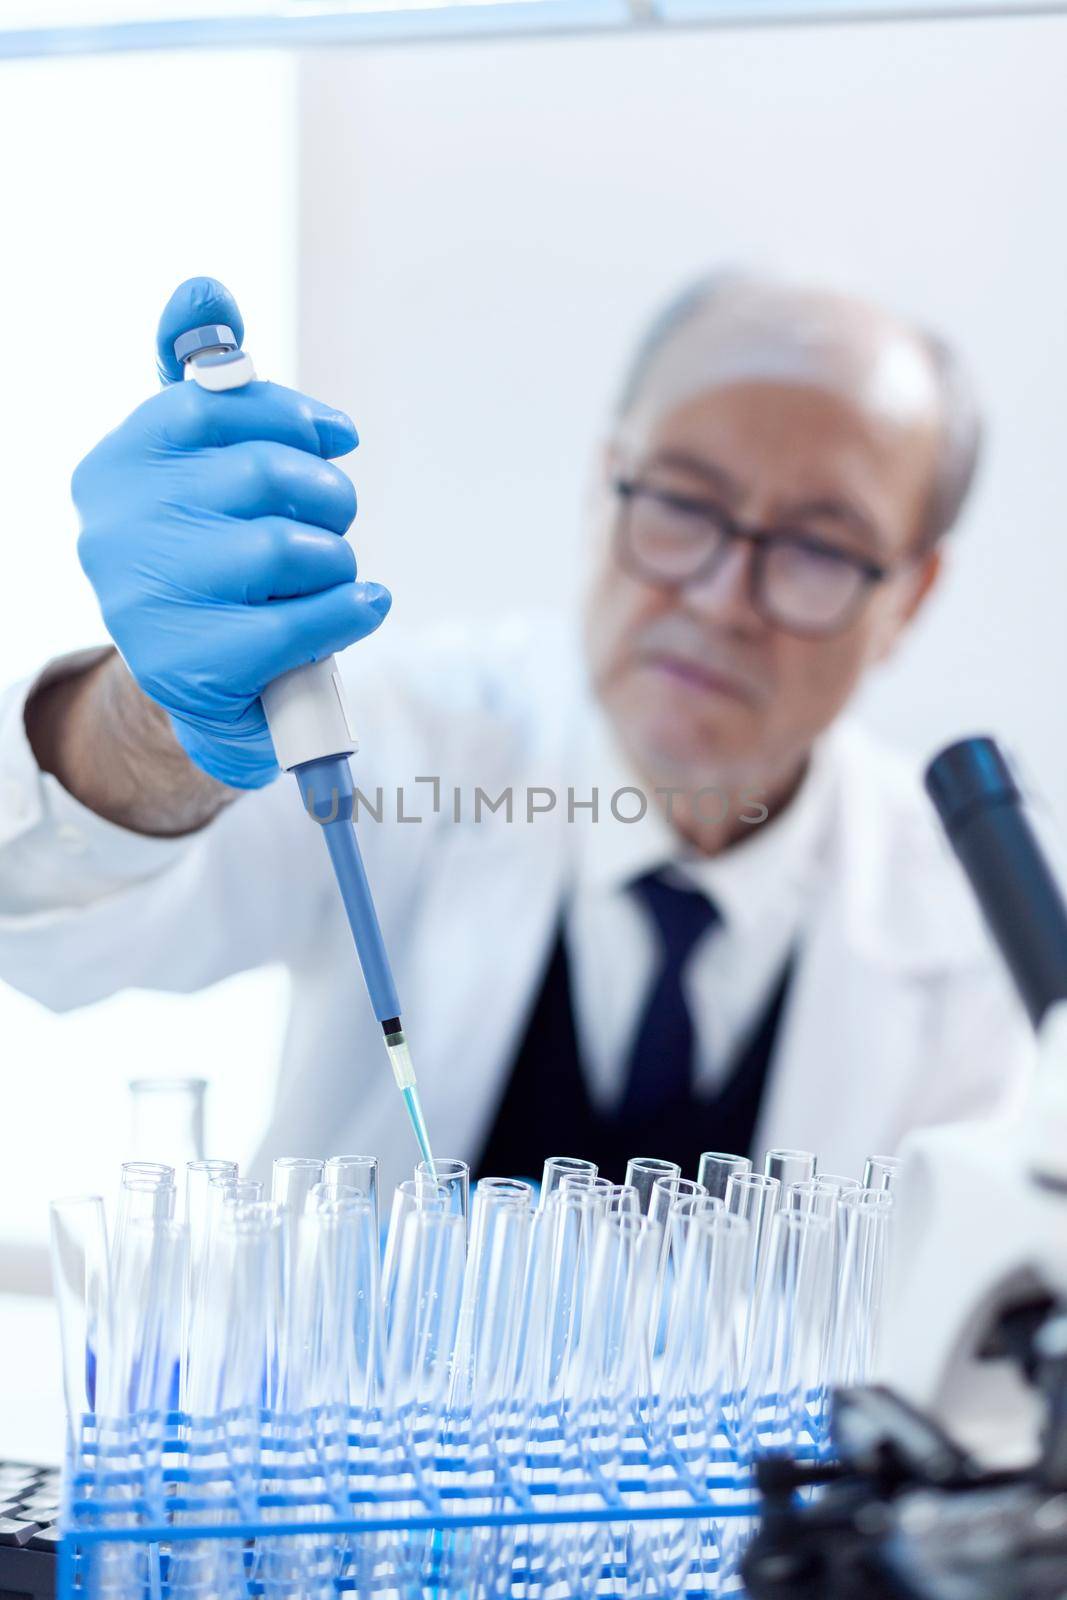 Scientist with protection gear using dropper pipette engineering vaccine treatment. Senior professional chemist using pippete with blue solution for microbiology tests.